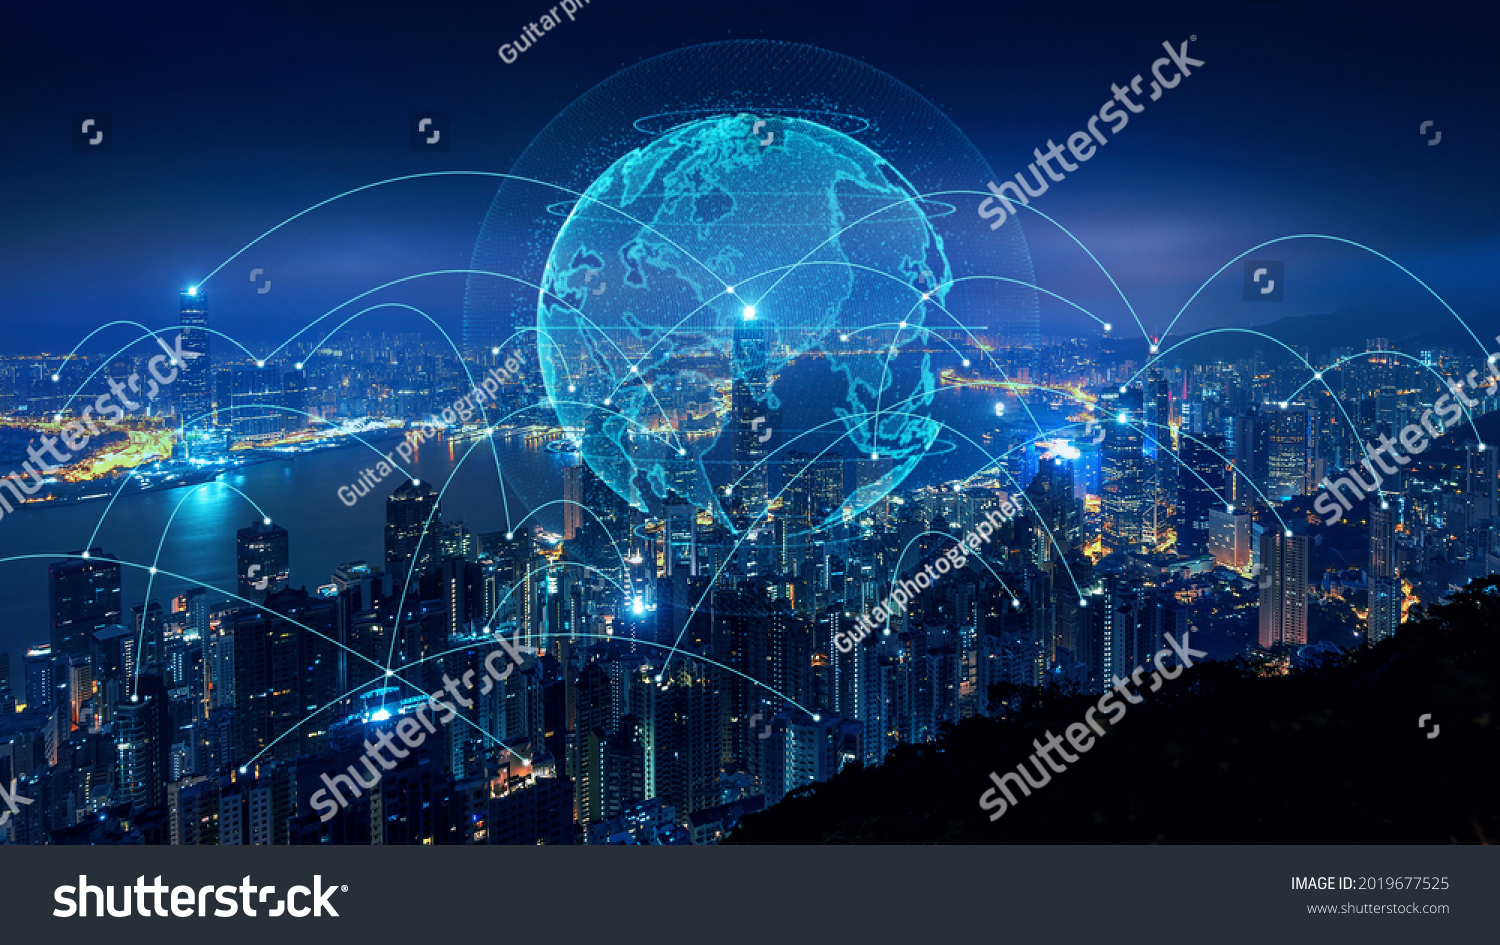 Smart connection network system, smart city network concept, 5G wireless connection. #2019677525